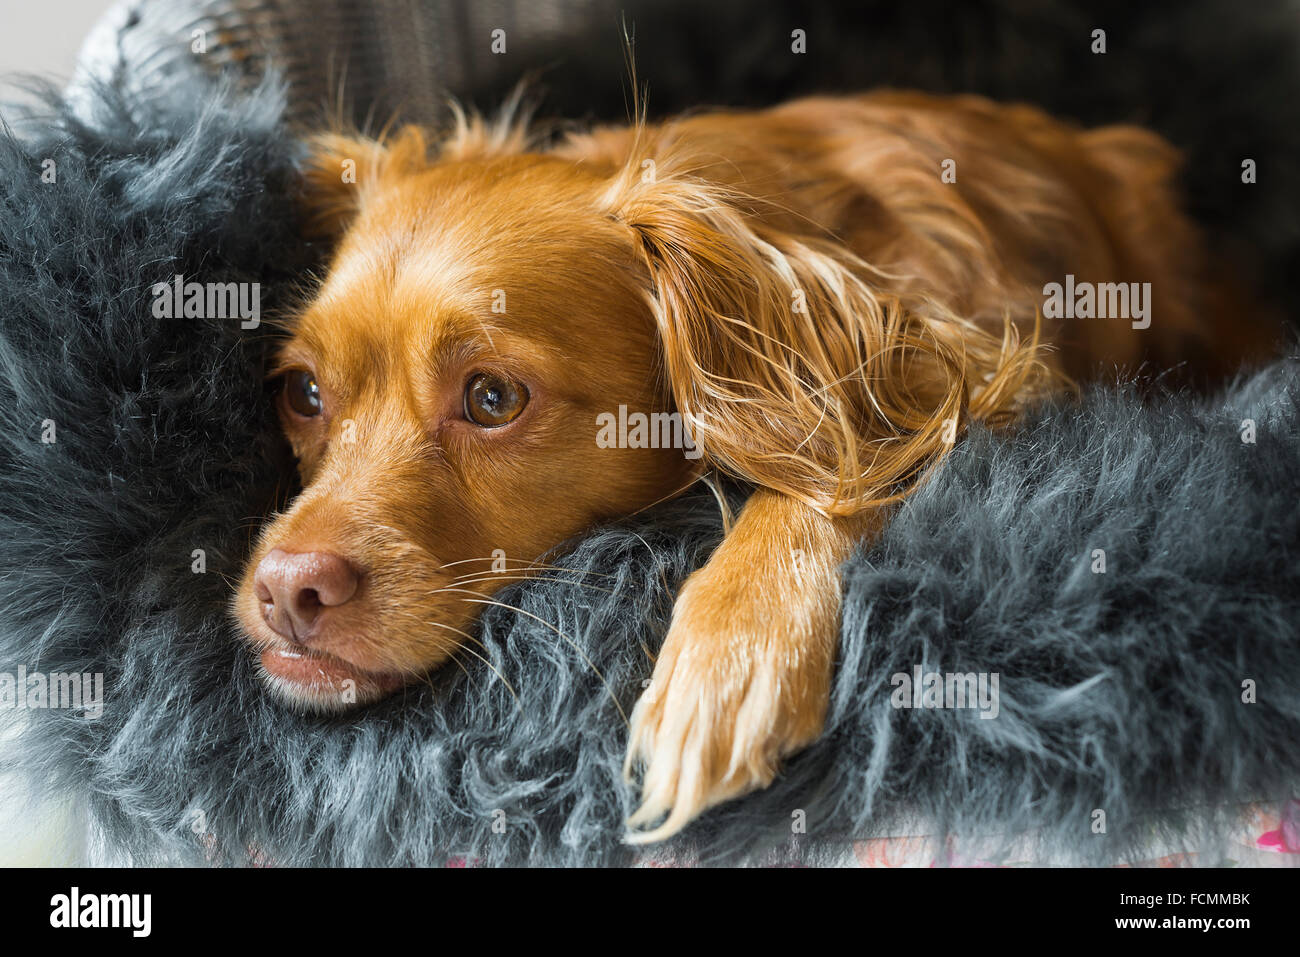 Spaniel mixed breed dog resting and posing on a fluffy sheepskin rug Stock Photo